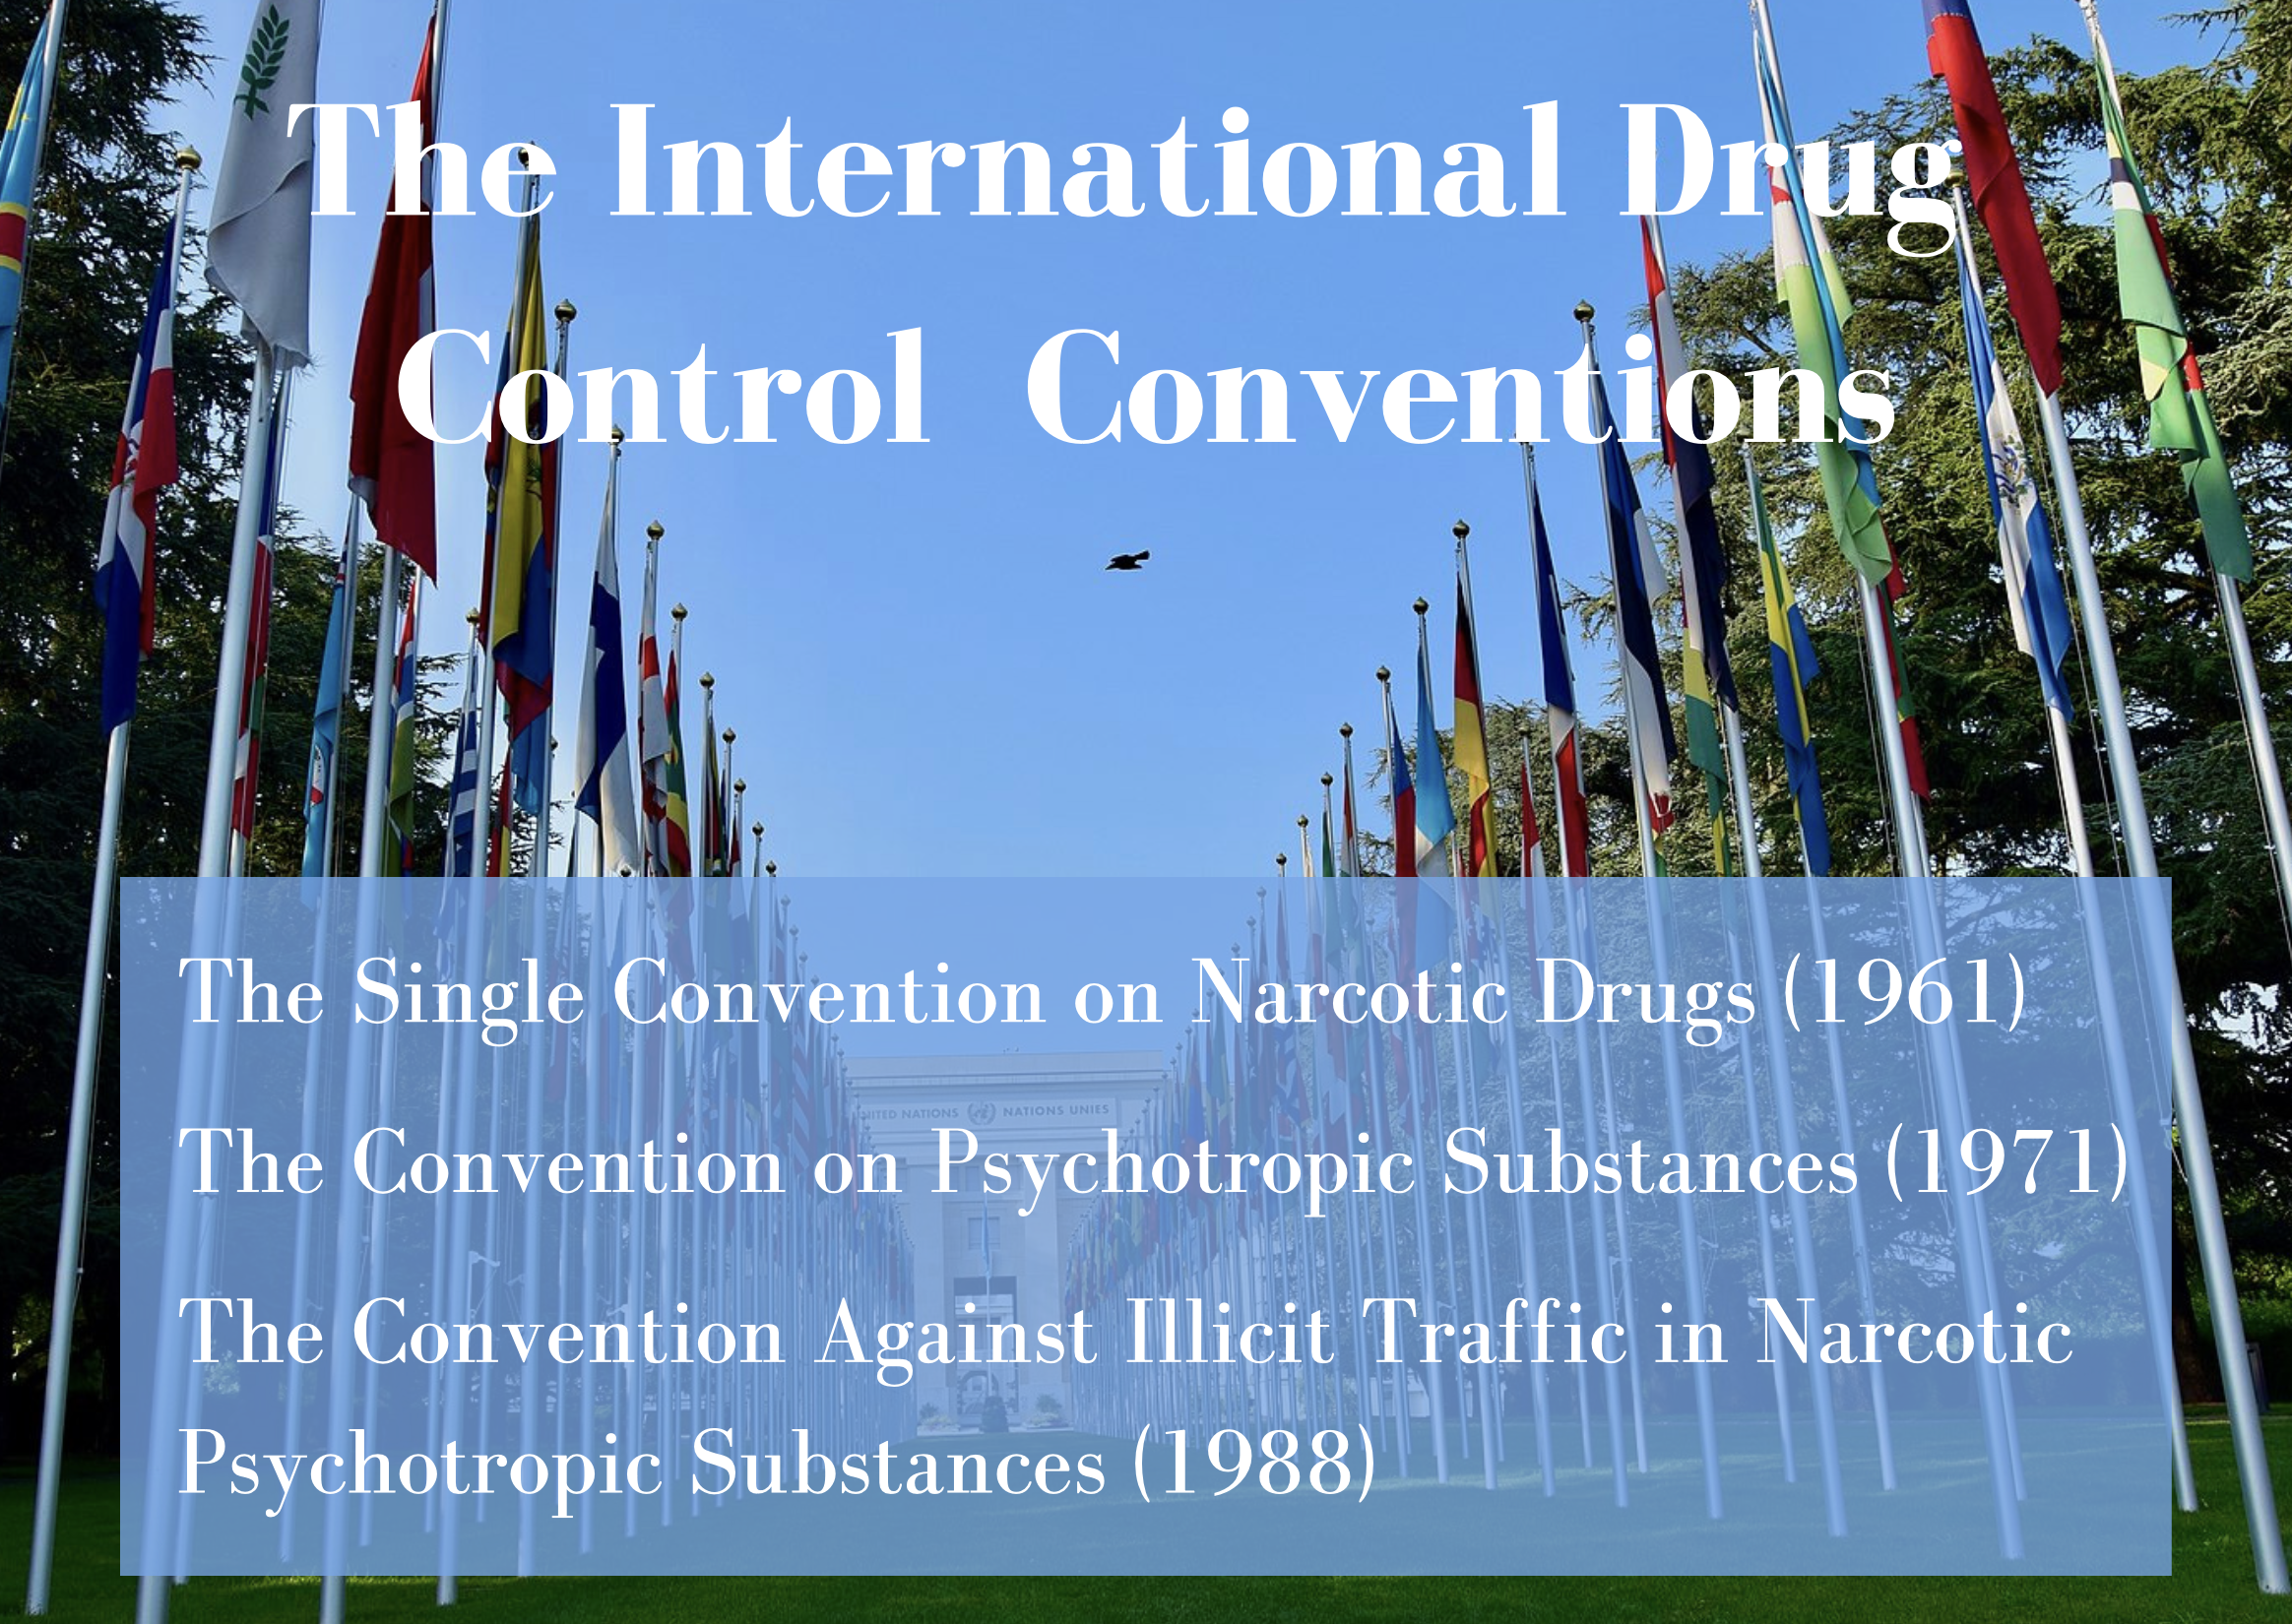 Screenshot of slide with photo of a grass path between two rows of flags atop flag posts leading to a building. The text superimposed on the photo reads, "International Drug Control Conventions" and lists 3 conventions.